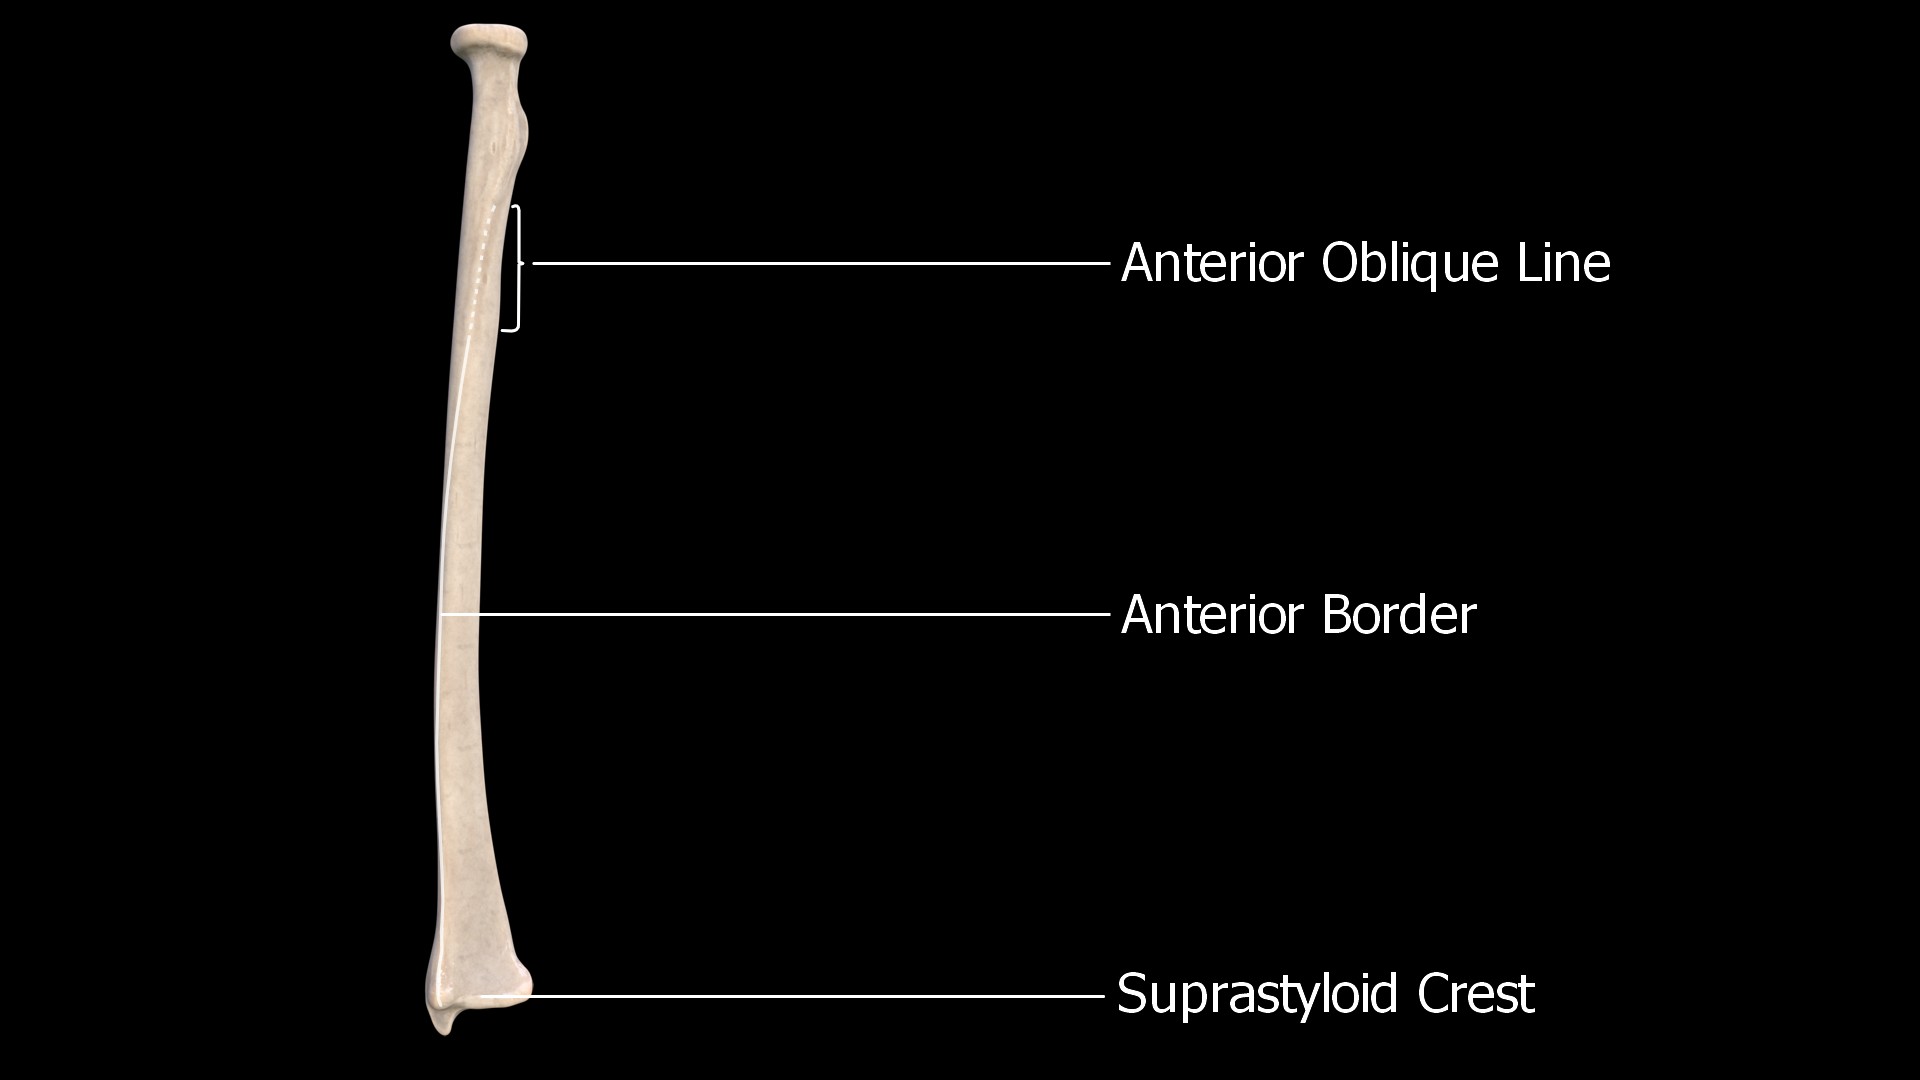 Anterior border of radius extending from the anterior oblique line to the suprastyloid crest